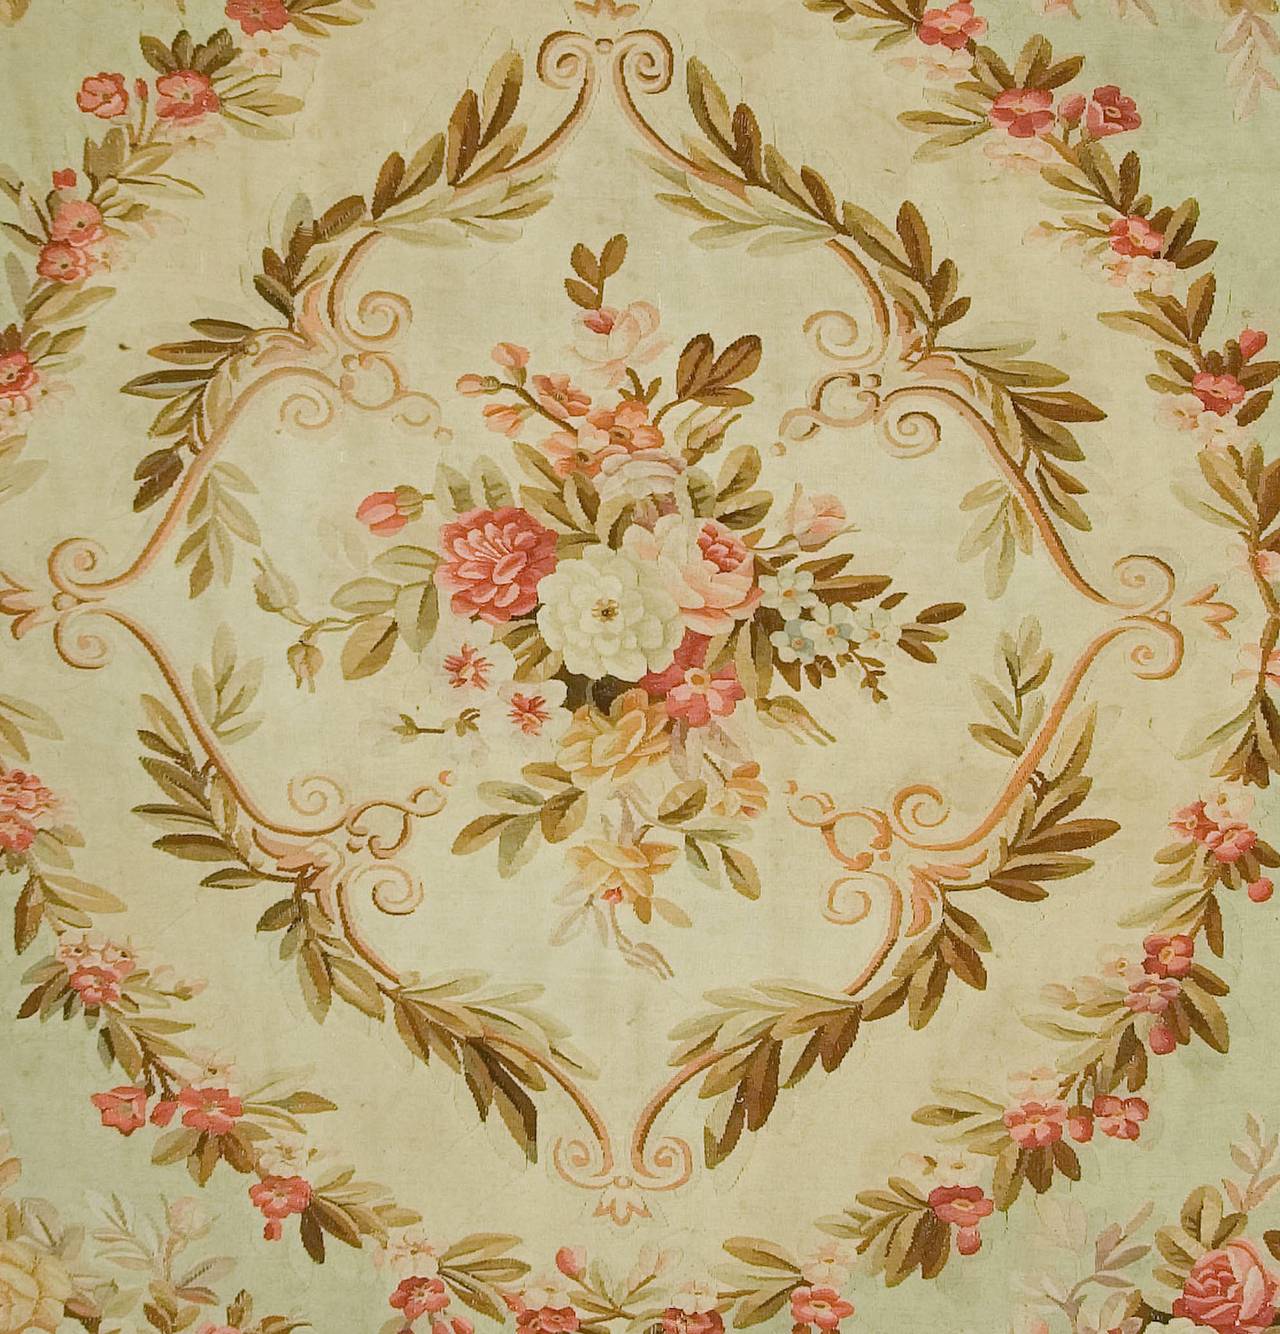 Antique French Aubusson rug, circa 1890. Aubusson carpets are pile less and tapestry woven from that town to the southwest of Paris, by a group of independent weavers working under Royal or State protection. The designs are strictly classical,